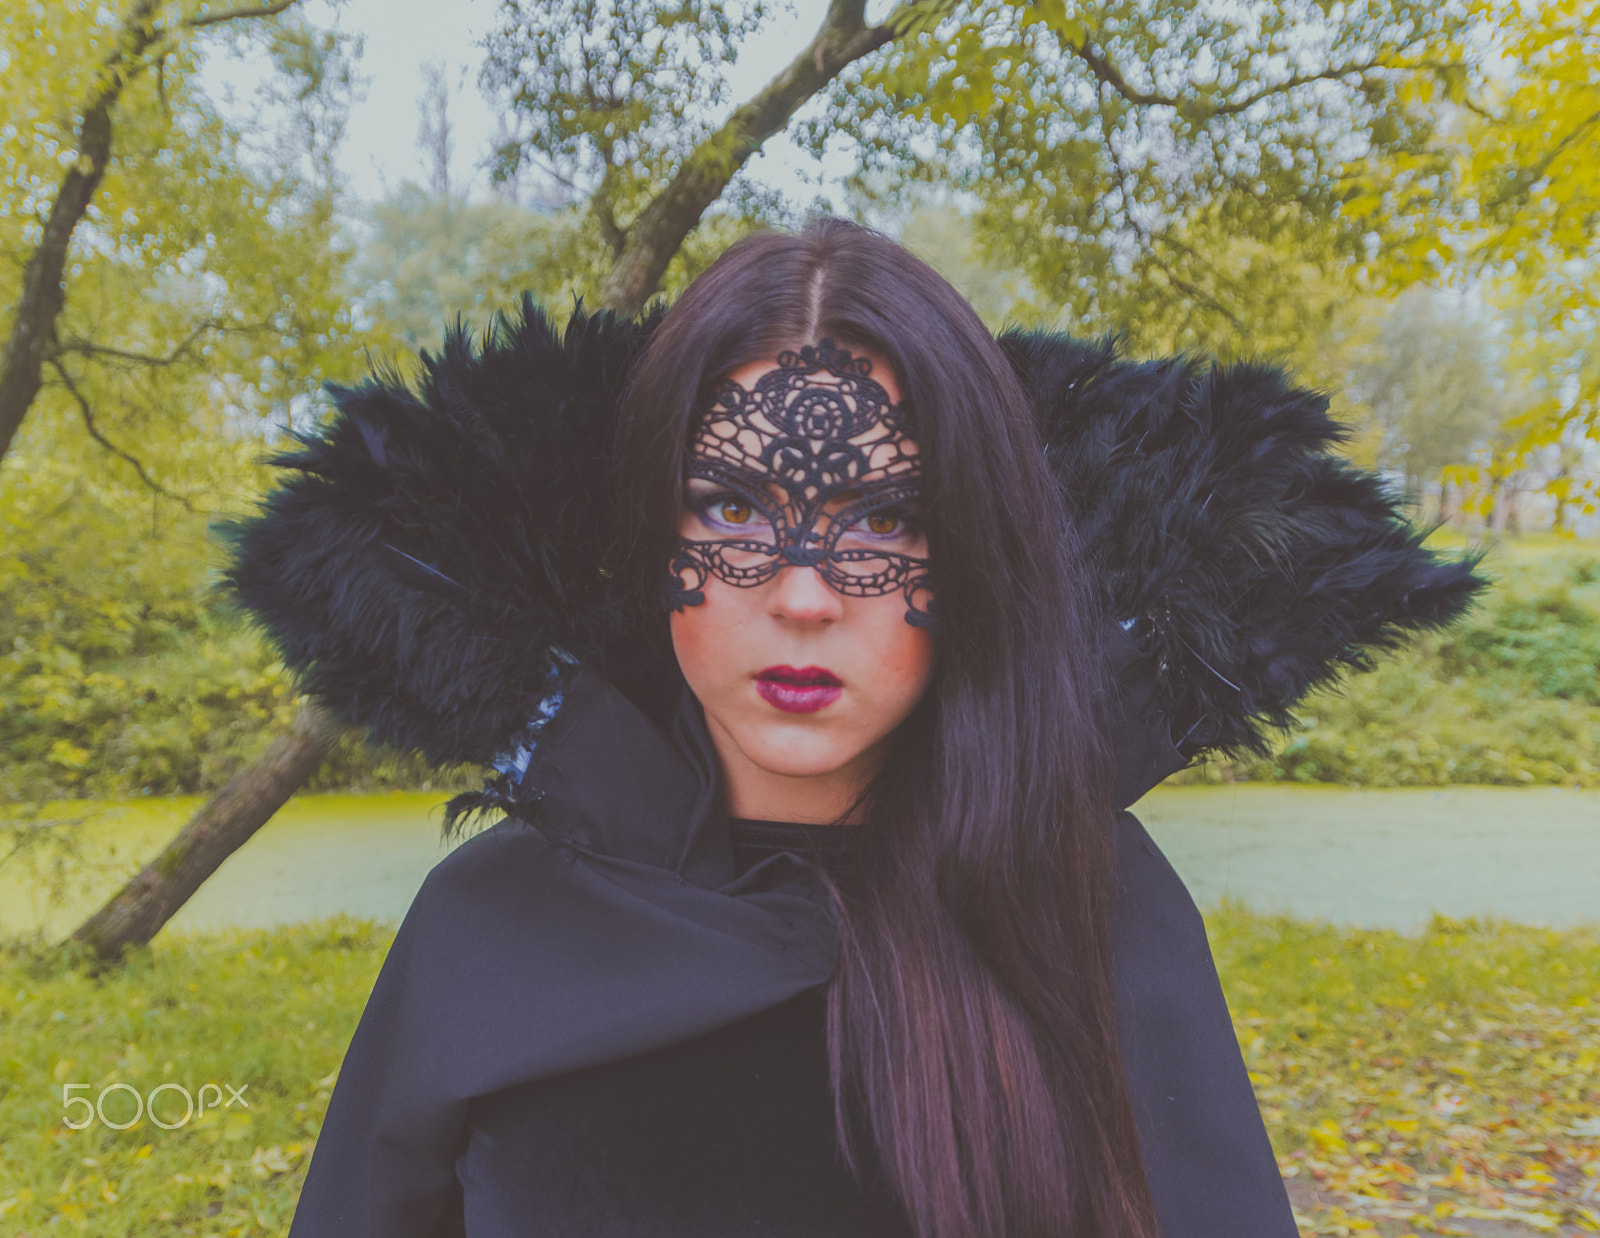 Nikon D7000 sample photo. Beautiful girl in a black mask and mantle photography